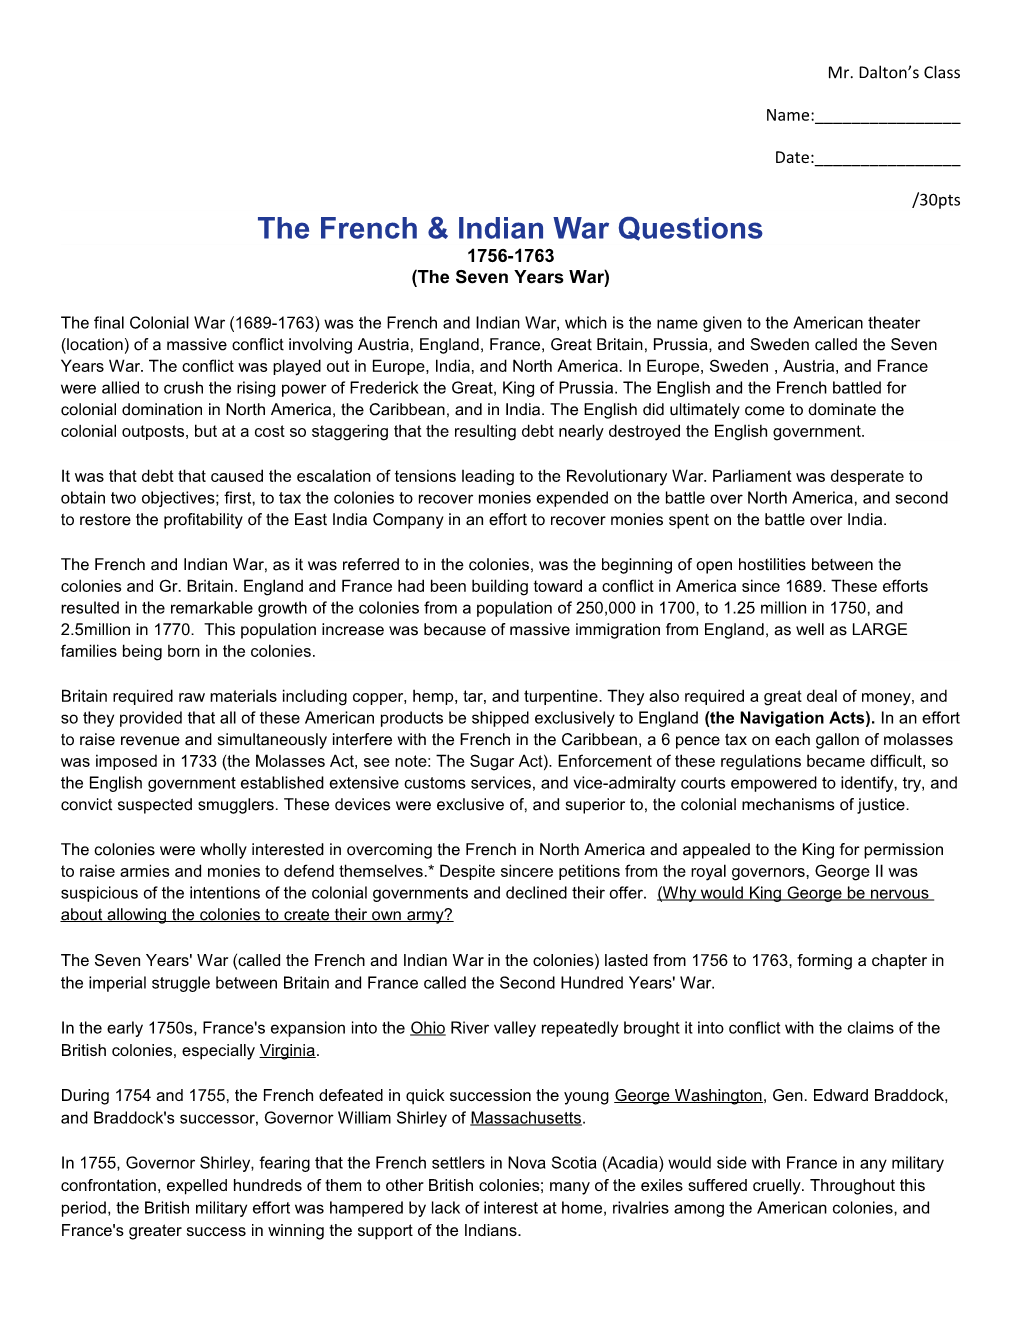 The French & Indian War Questions